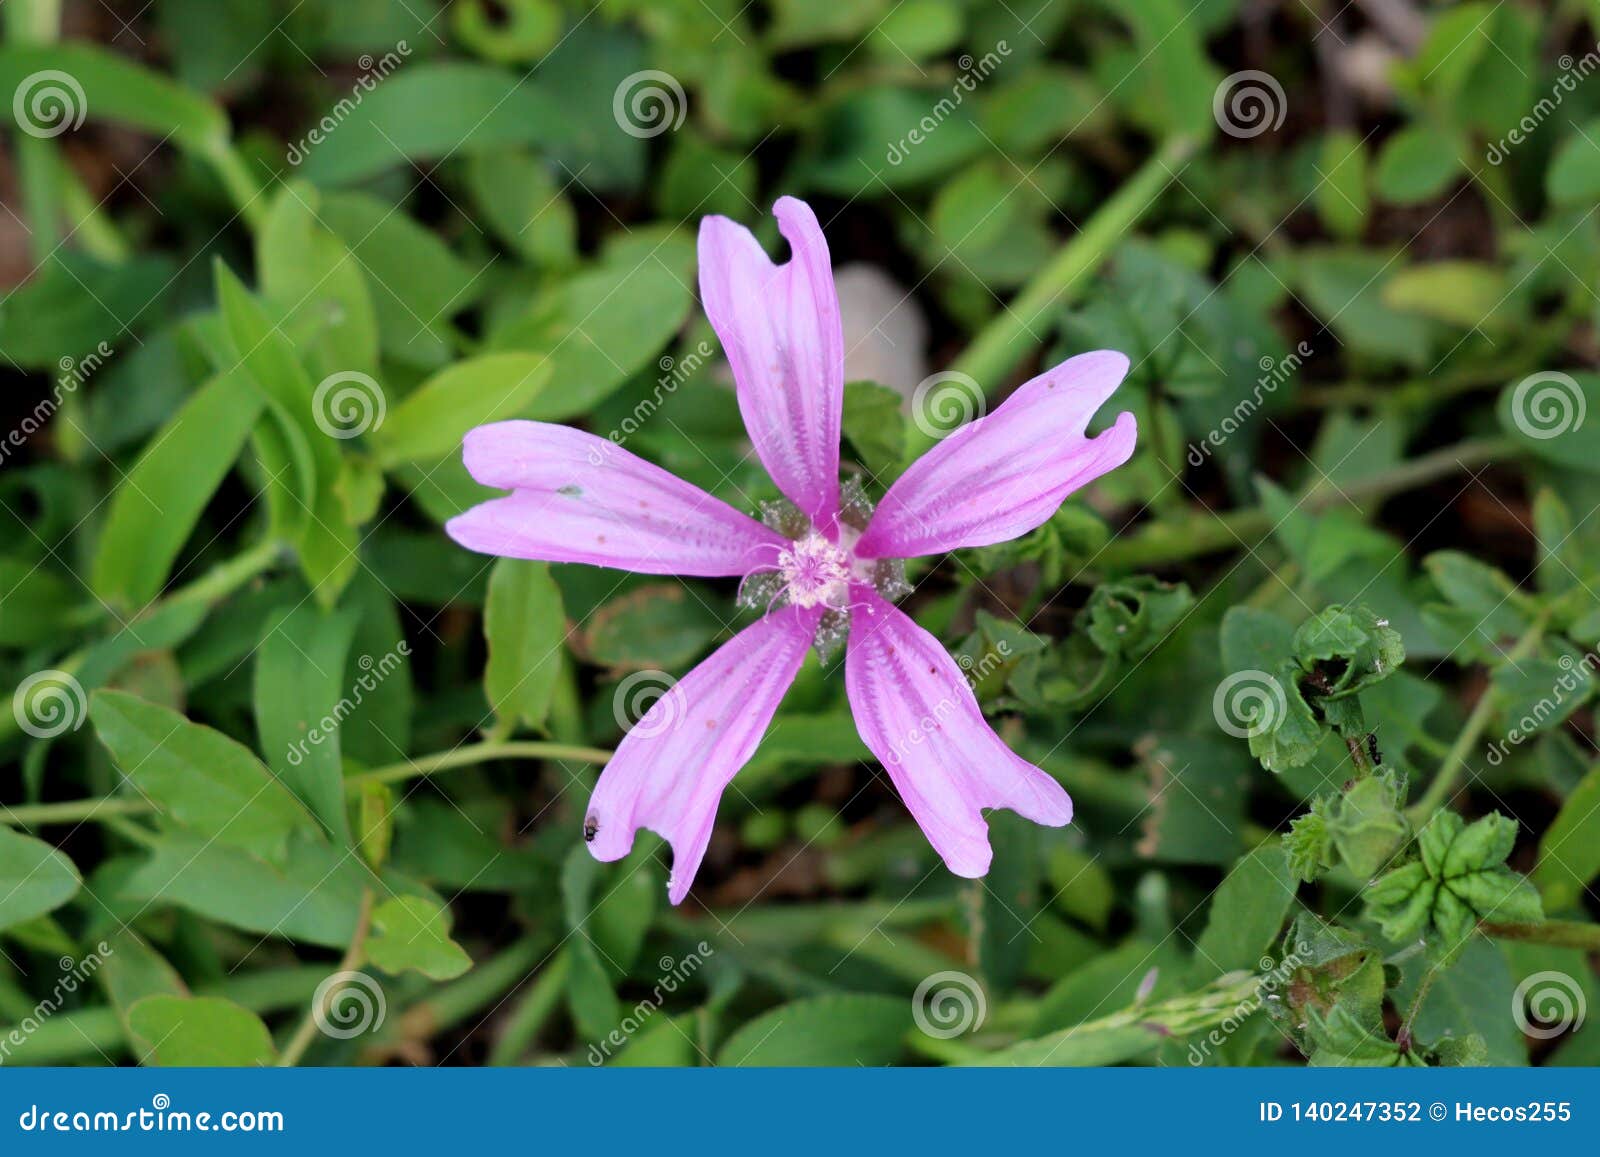 Single Common Mallow Or Malva Sylvestris Spreading Herb Plant With Bright Pinkish Purple With Dark Stripes Flower Growing In Local Stock Photo Image Of Warm Stripes 140247352